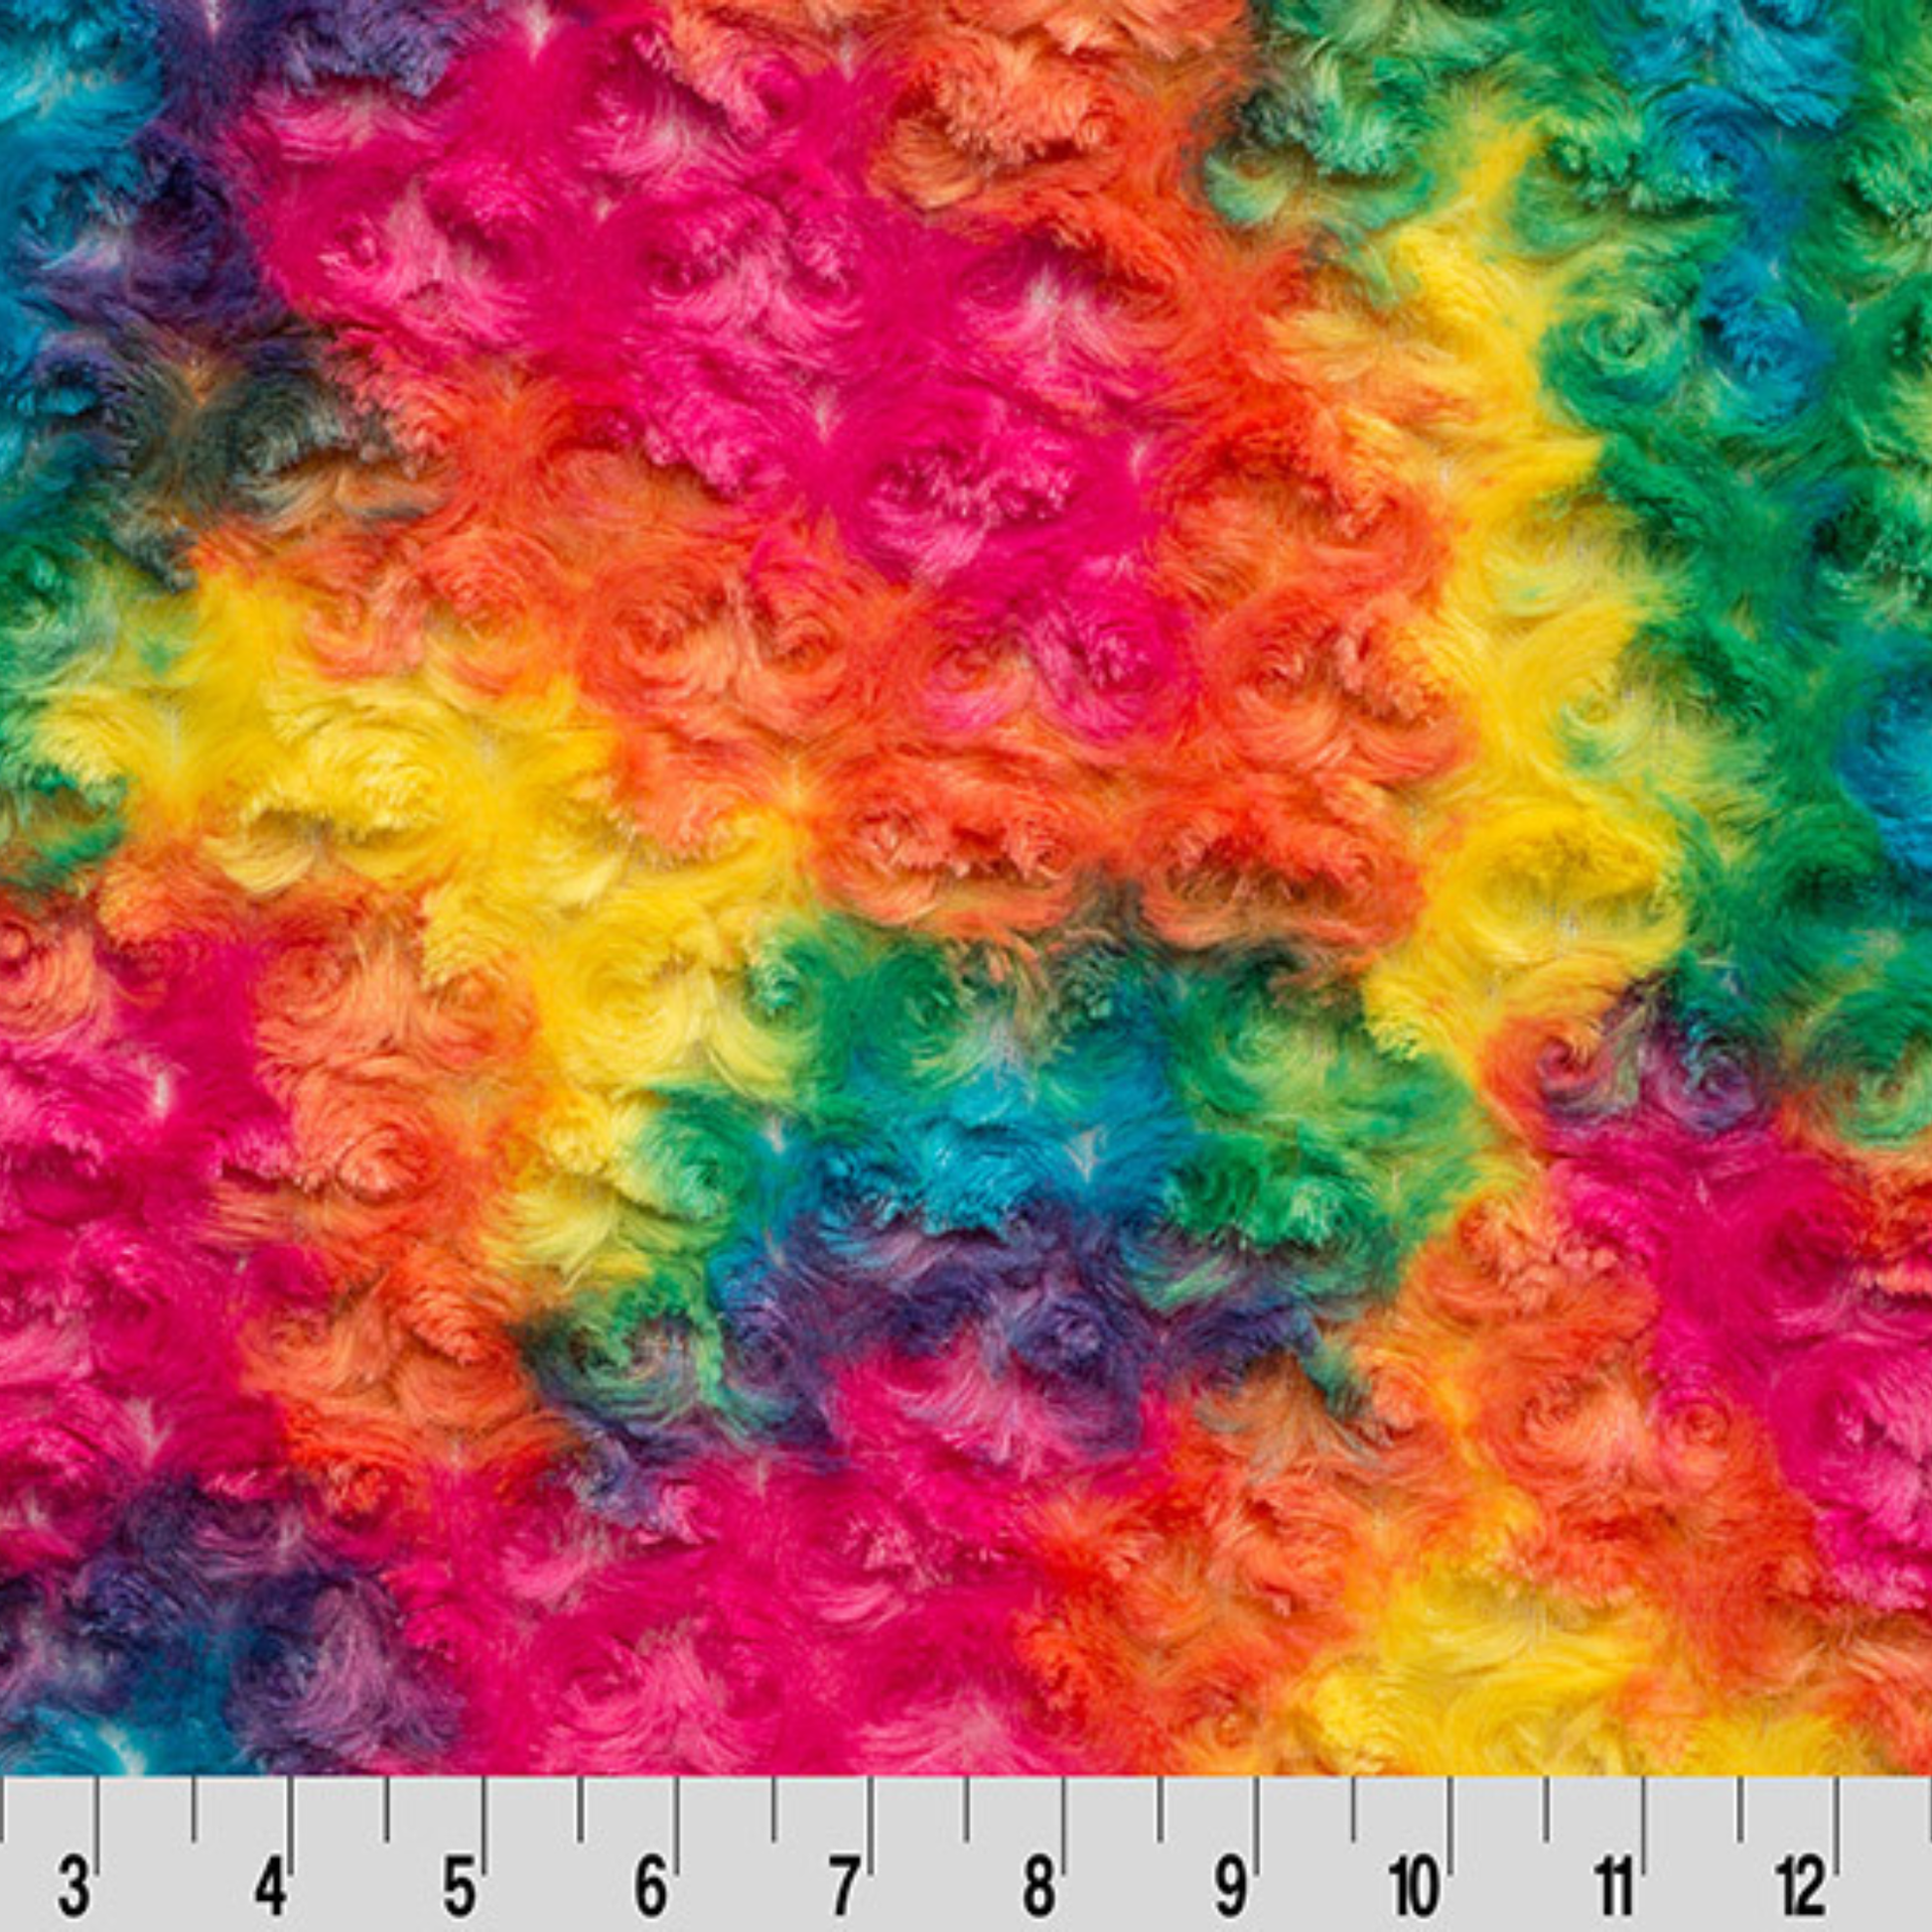 Shannon Fabrics Fabric 1 yard (36"x60") / Vibrant Luxe Cuddle® Rainbow Rose Cuddle® Minky in Cotton Candy, Sorbet or Vibrant